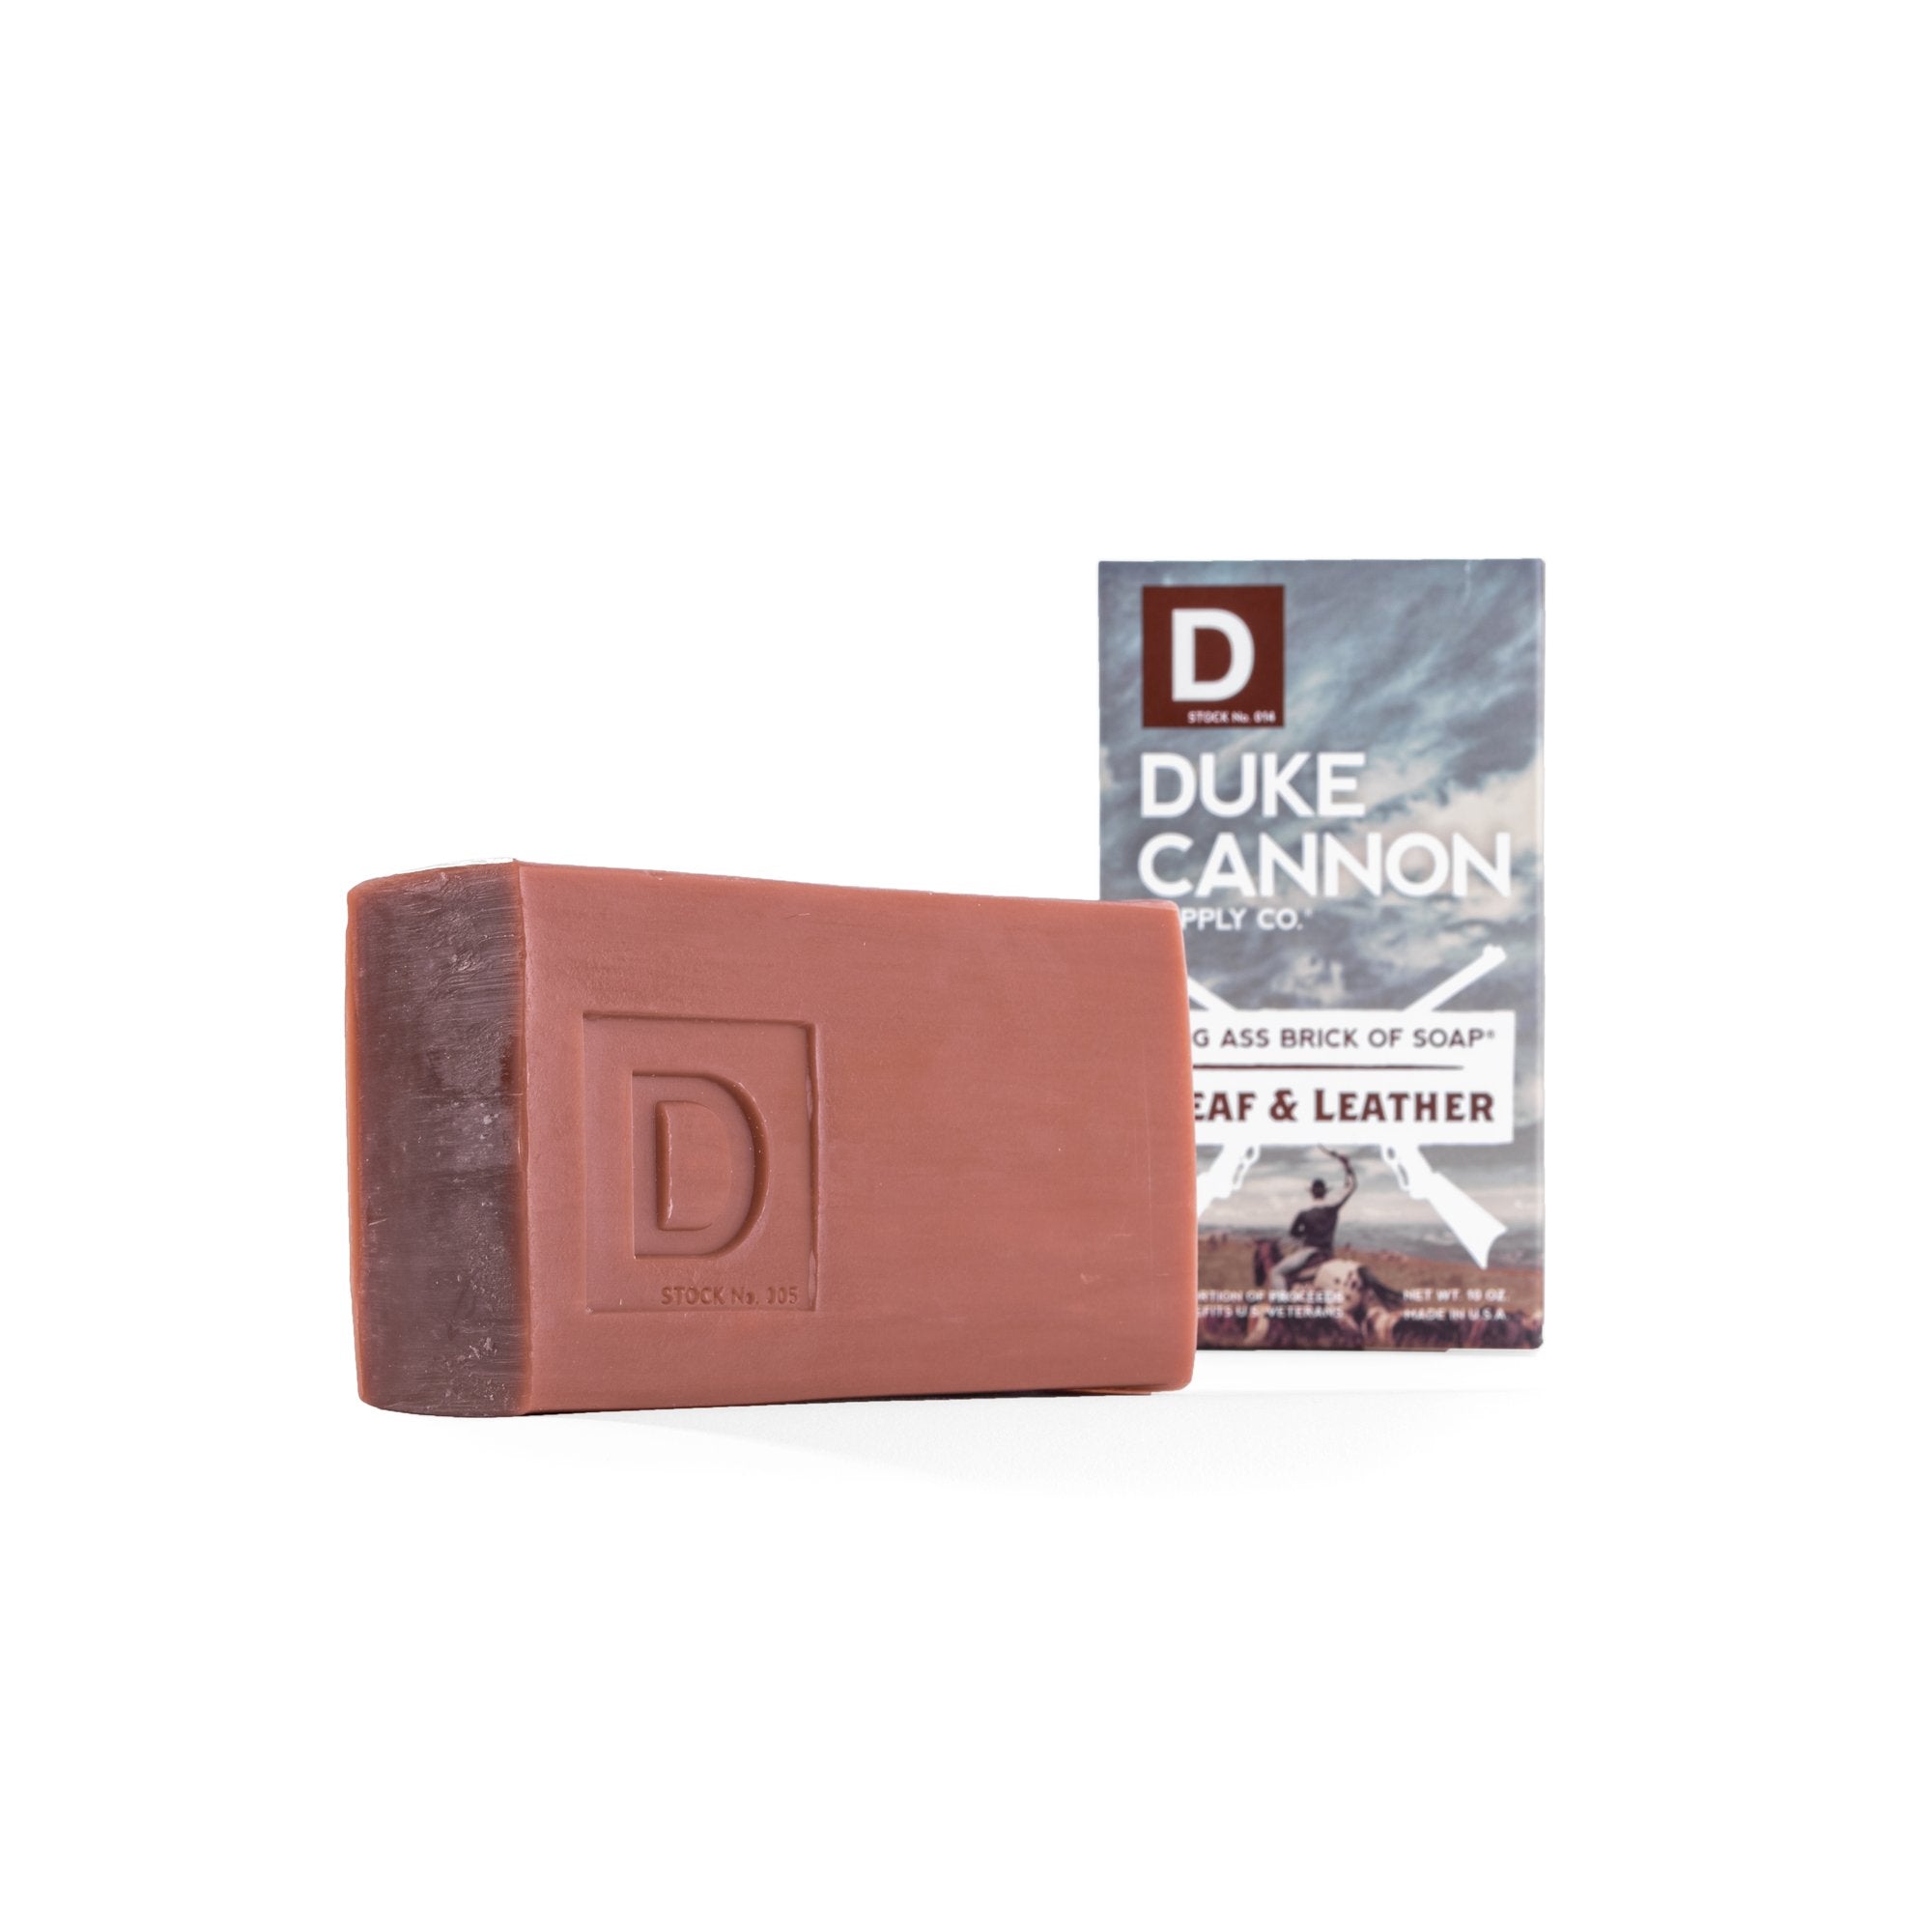 Duke Cannon Big Ass Brick of Soap - Leaf and Leather    